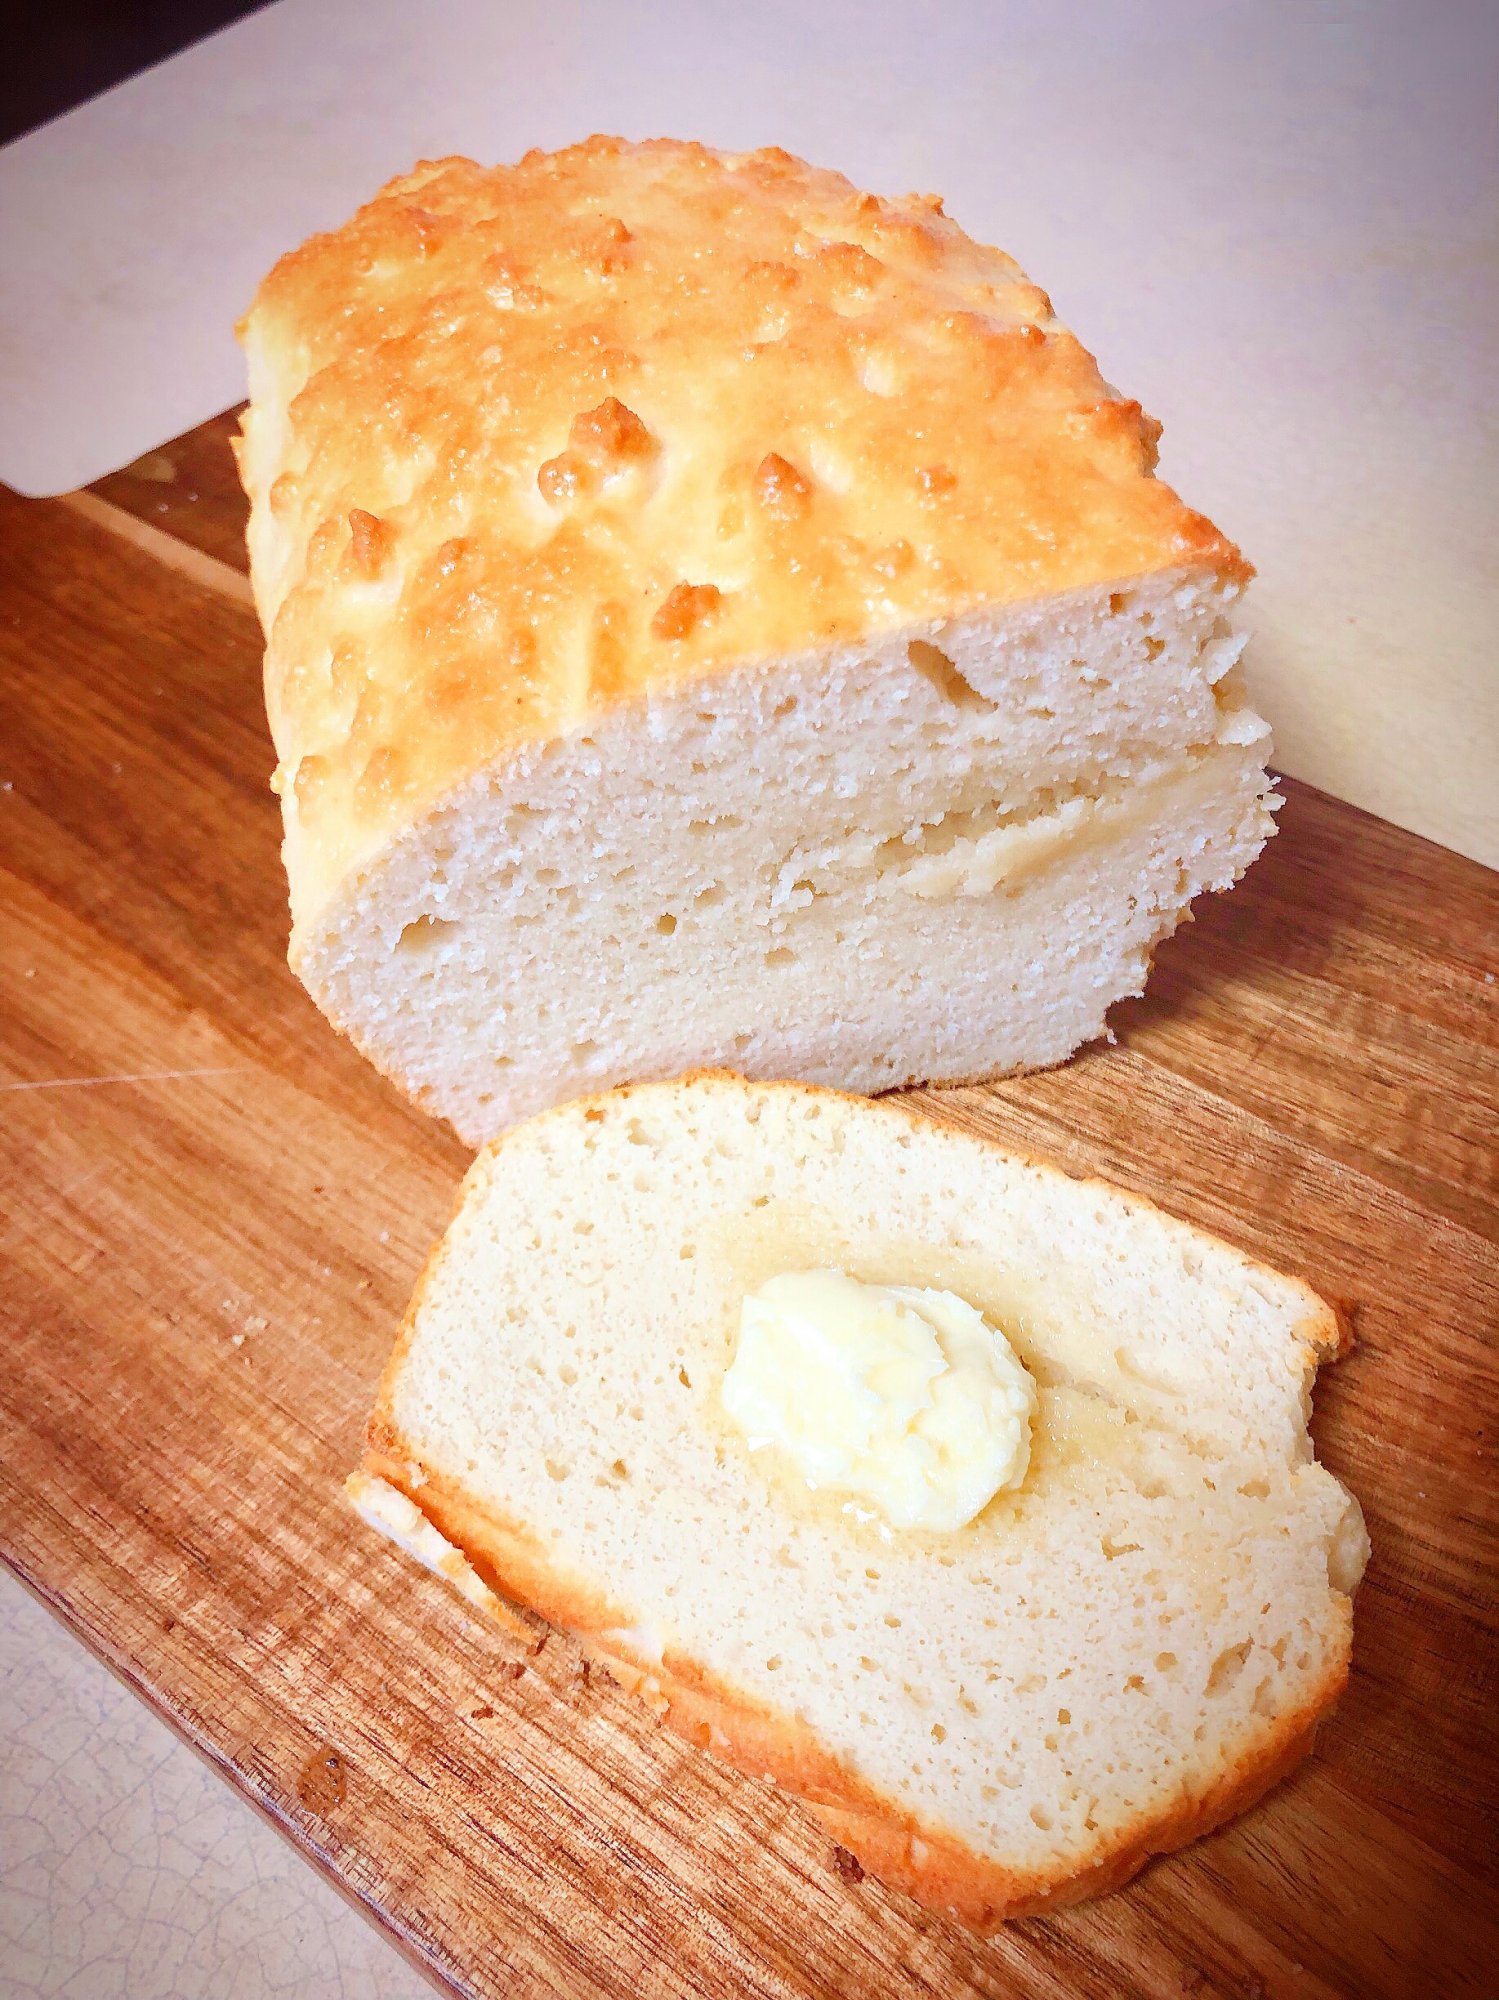 Eggless Low-Carb Bread - Keto, Low-Carb, Gluten-Free